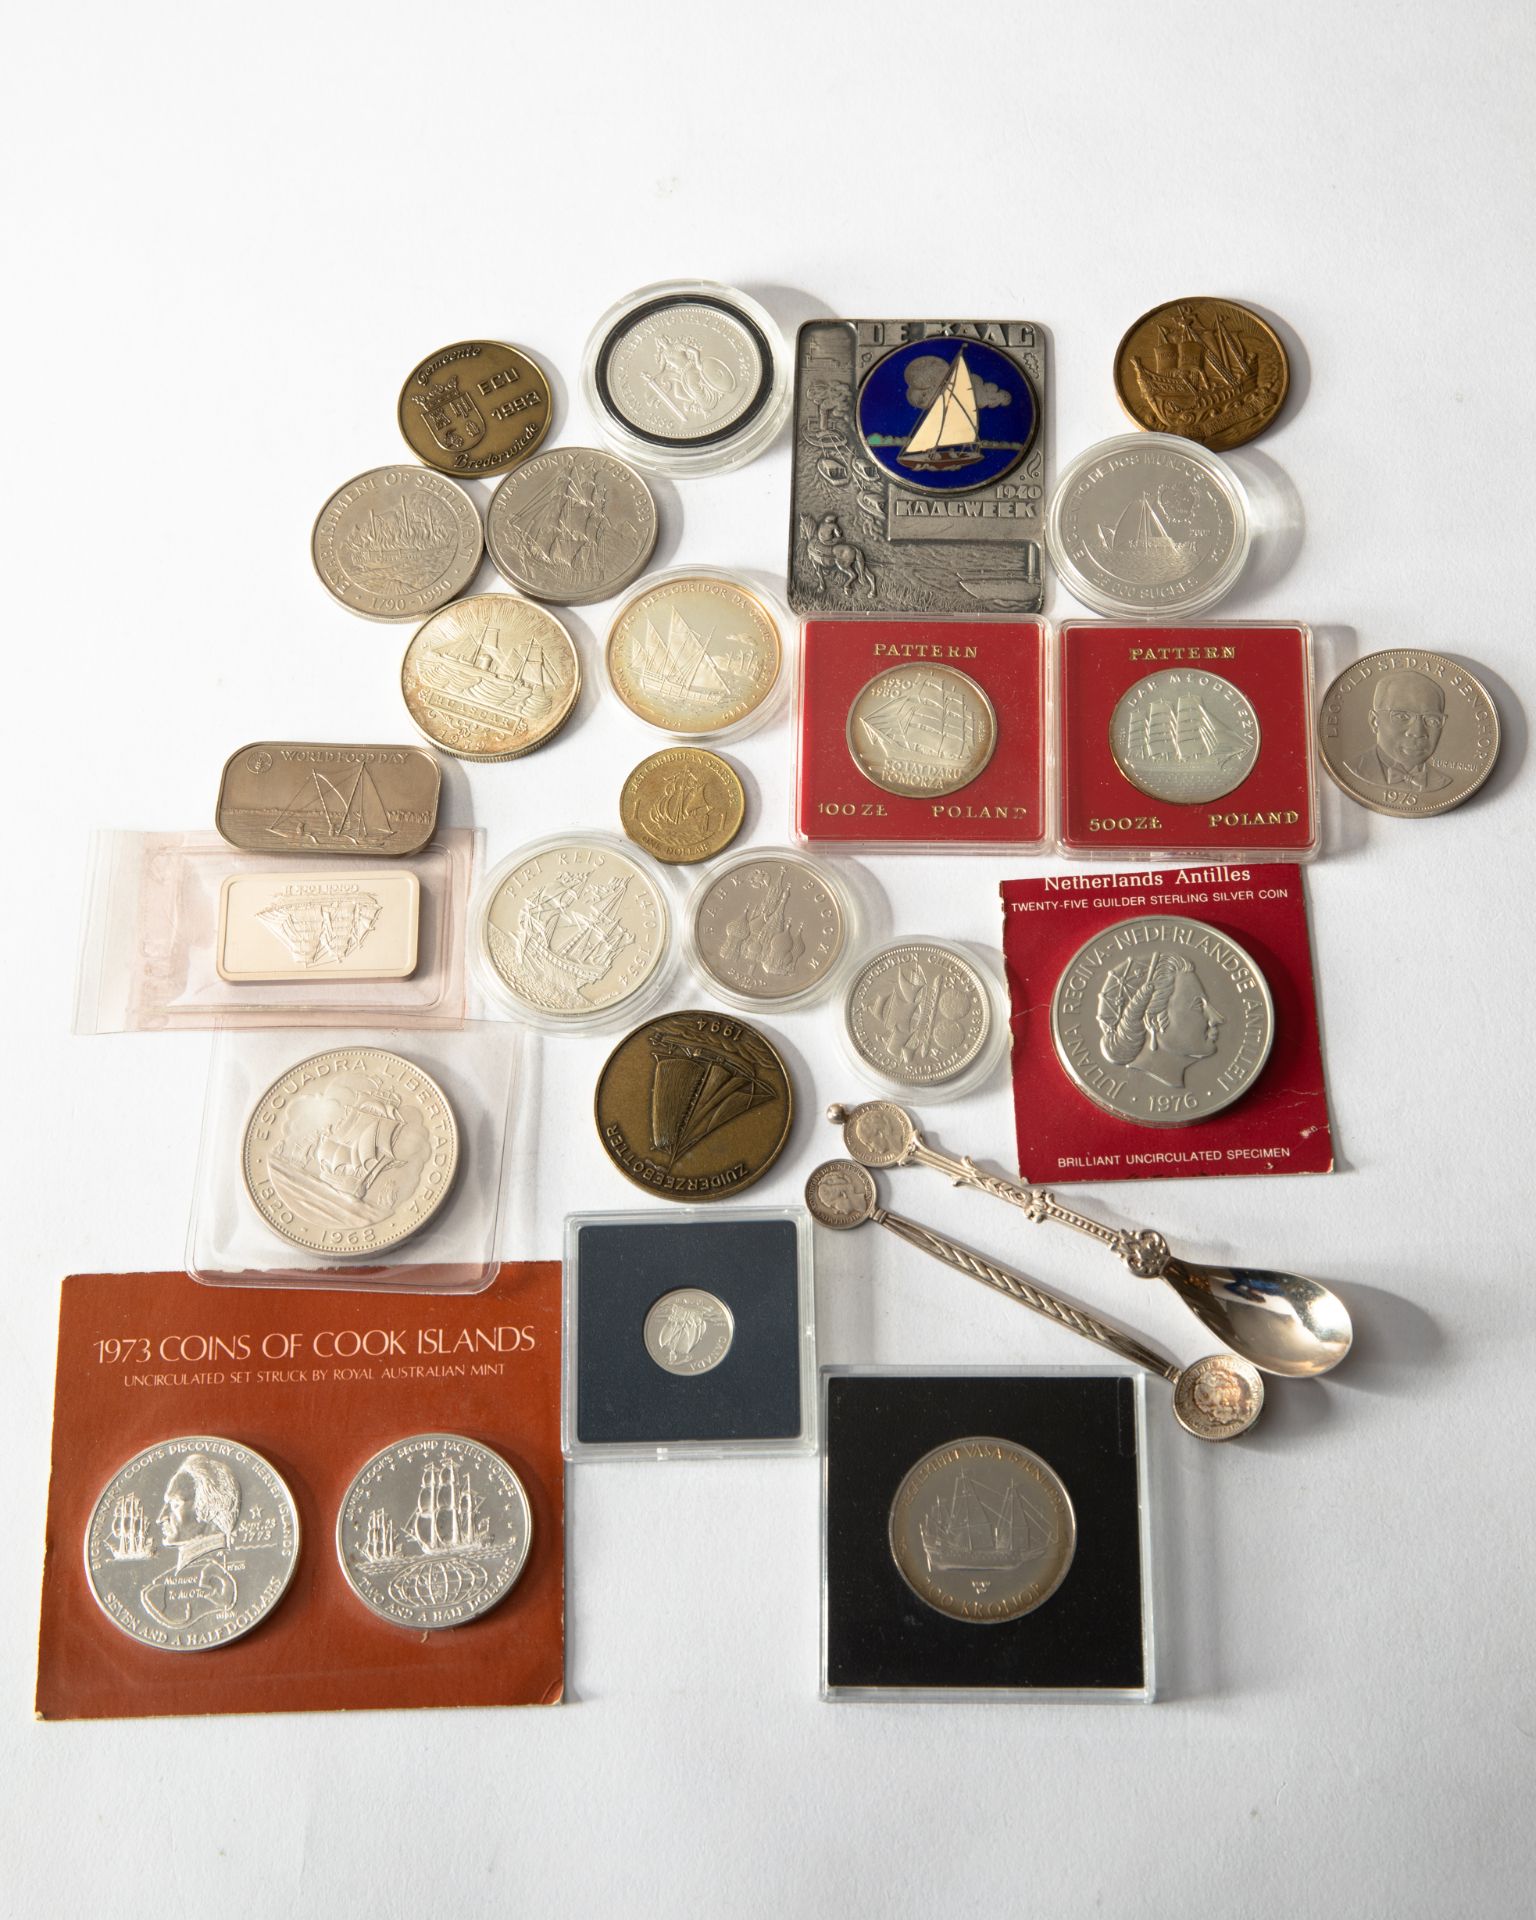 Ships, silver coins and medals